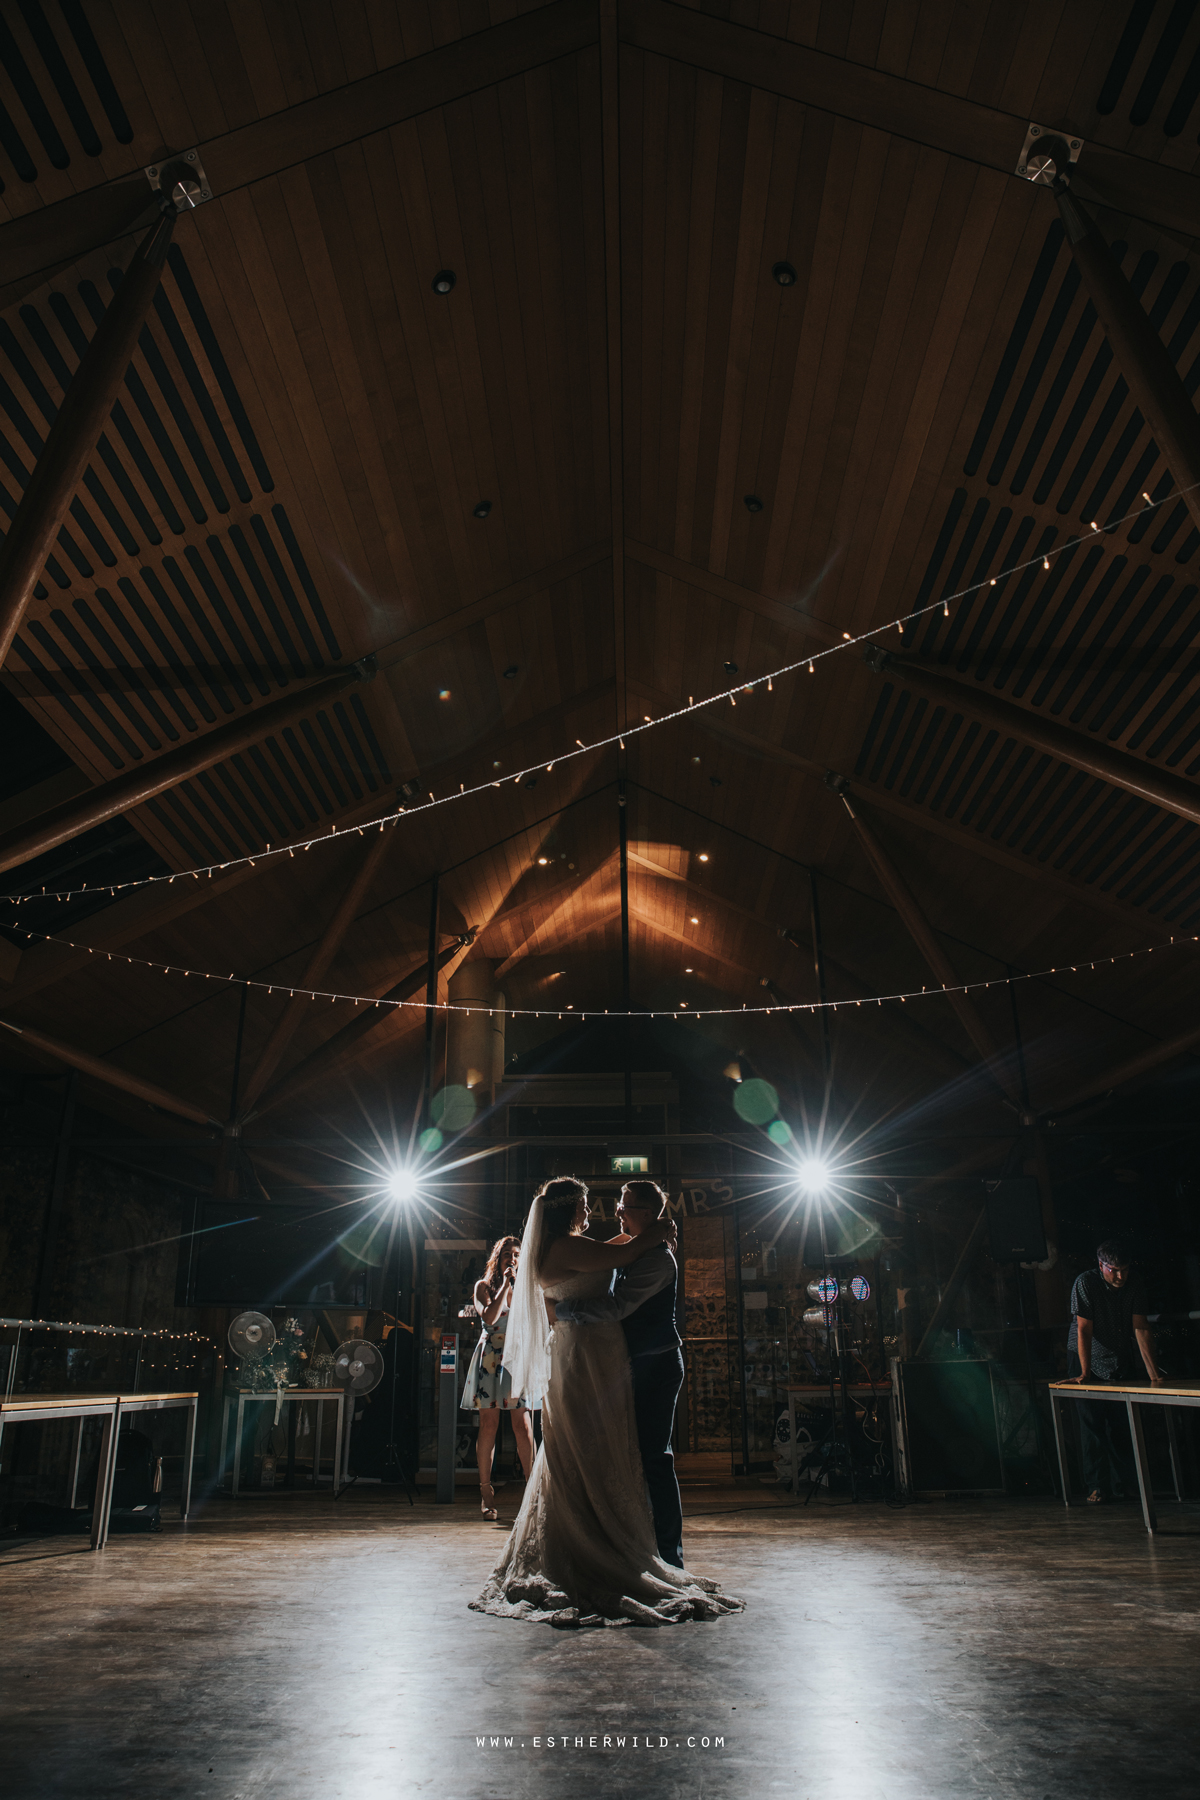 Norwich_Castle_Arcade_Grosvenor_Chip_Birdcage_Cathedral_Cloisters_Refectory_Wedding_Photography_Esther_Wild_Photographer_Norfolk_Kings_Lynn_3R8A3223.jpg